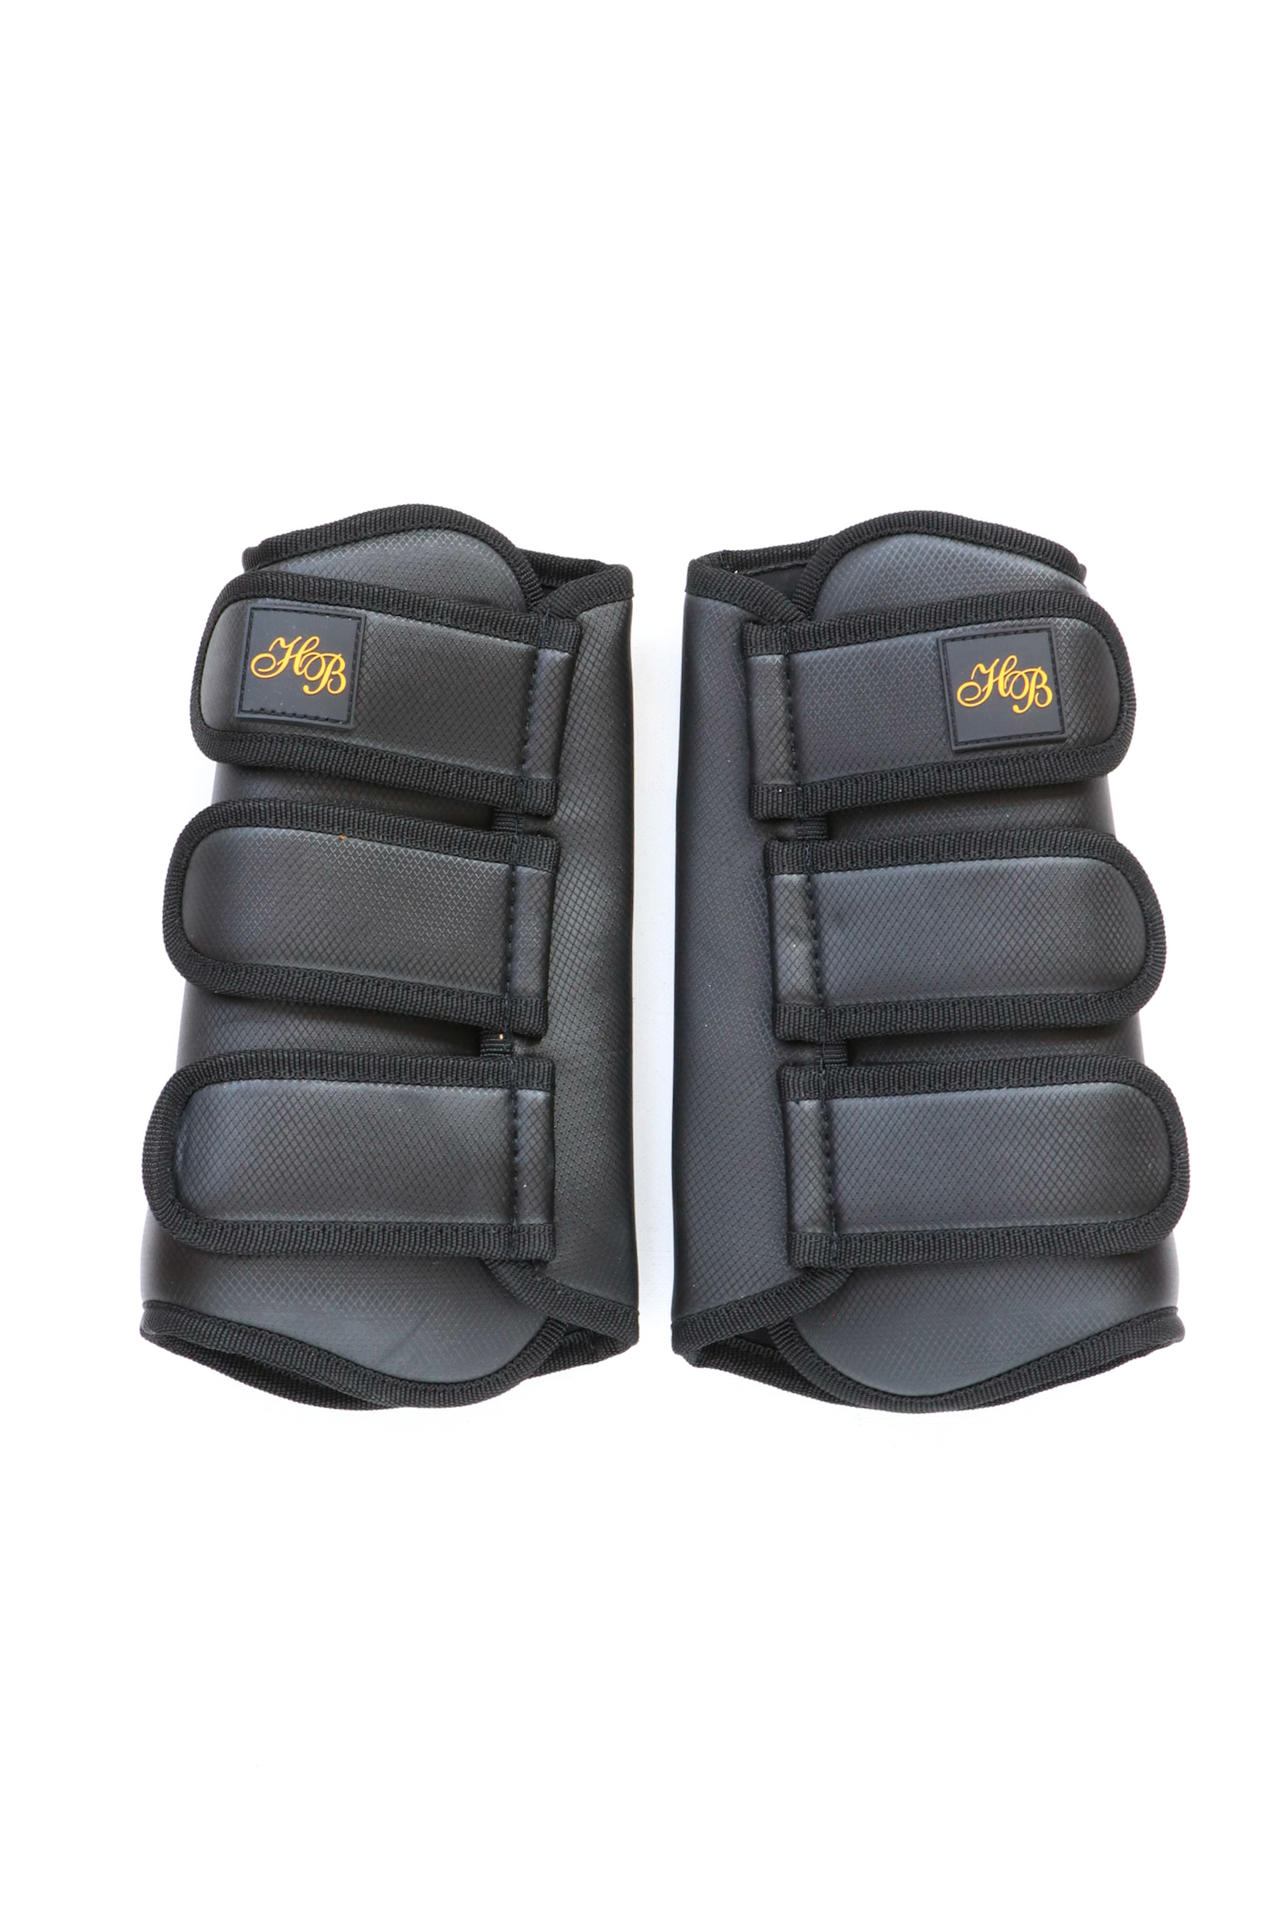 206 Comfort tendon protection boot forelegs  foot protection